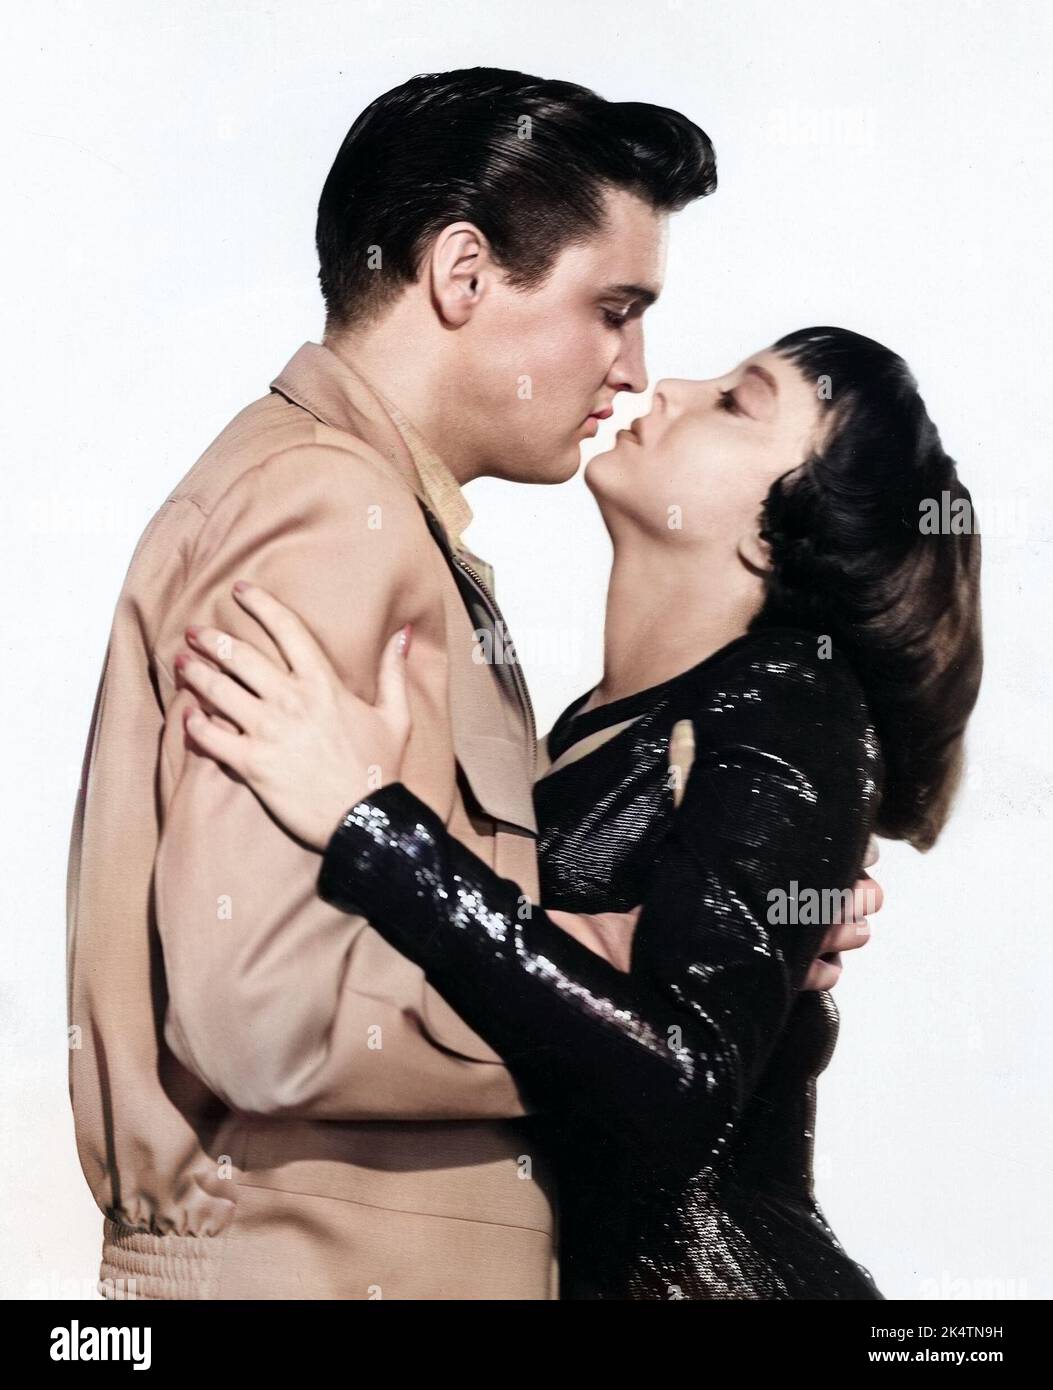 Elvis Presley and Caroline Jones in 'King Creole' (Paramount, 1958) publicity still colorized photo. Stock Photo